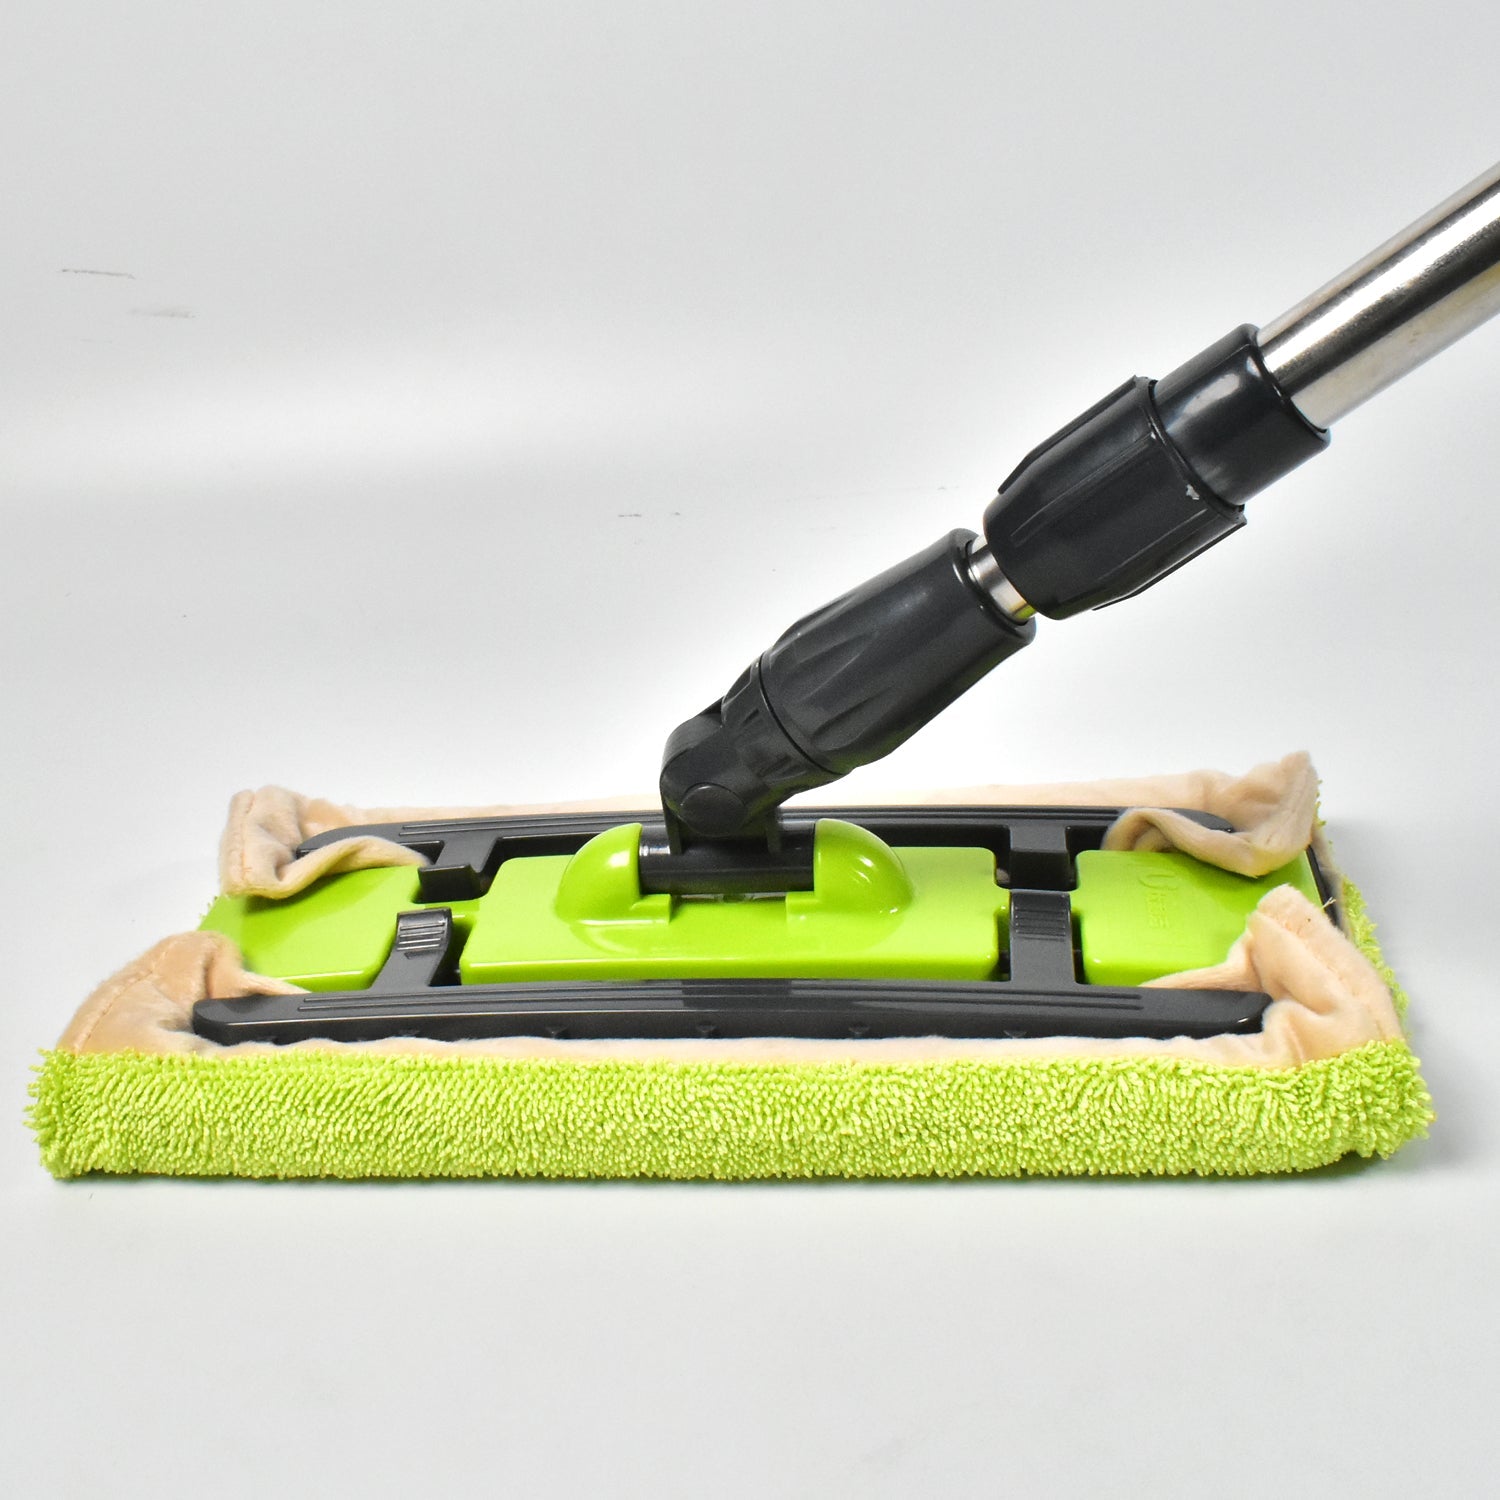 7870 DRY CLEANING FLAT MICROFIBER FLOOR CLEANING MOP WITH STEEL ROD LONG HANDLE DRY MOP DeoDap